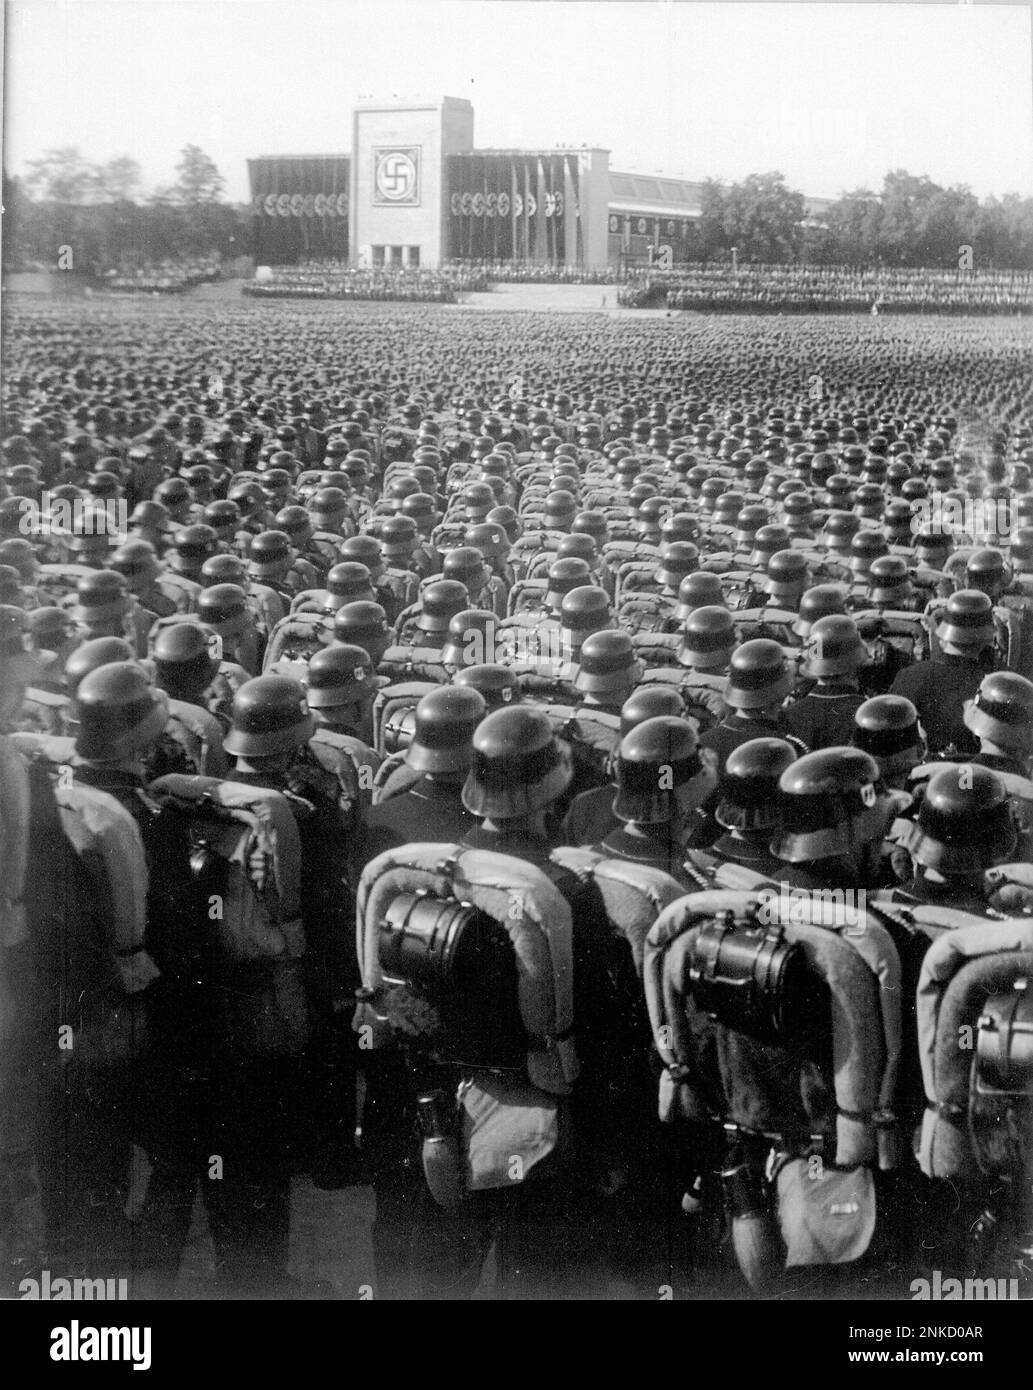 SS-VT in full marching order at the Nuremburg Rally in  1935. The  SS-Verfügungstruppe (SS-VT or V-Truppe)  was formed in 1934 as combat troops for the Nazi Party. On 17 August 1938 Adolf Hitler decreed that the SS-VT was neither a part of the Ordnungspolizei (regular police) nor the Wehrmacht, but military-trained men at the disposal of the Führer.  By 1940 these military SS units had become the nucleus of the Waffen-SS. Stock Photo